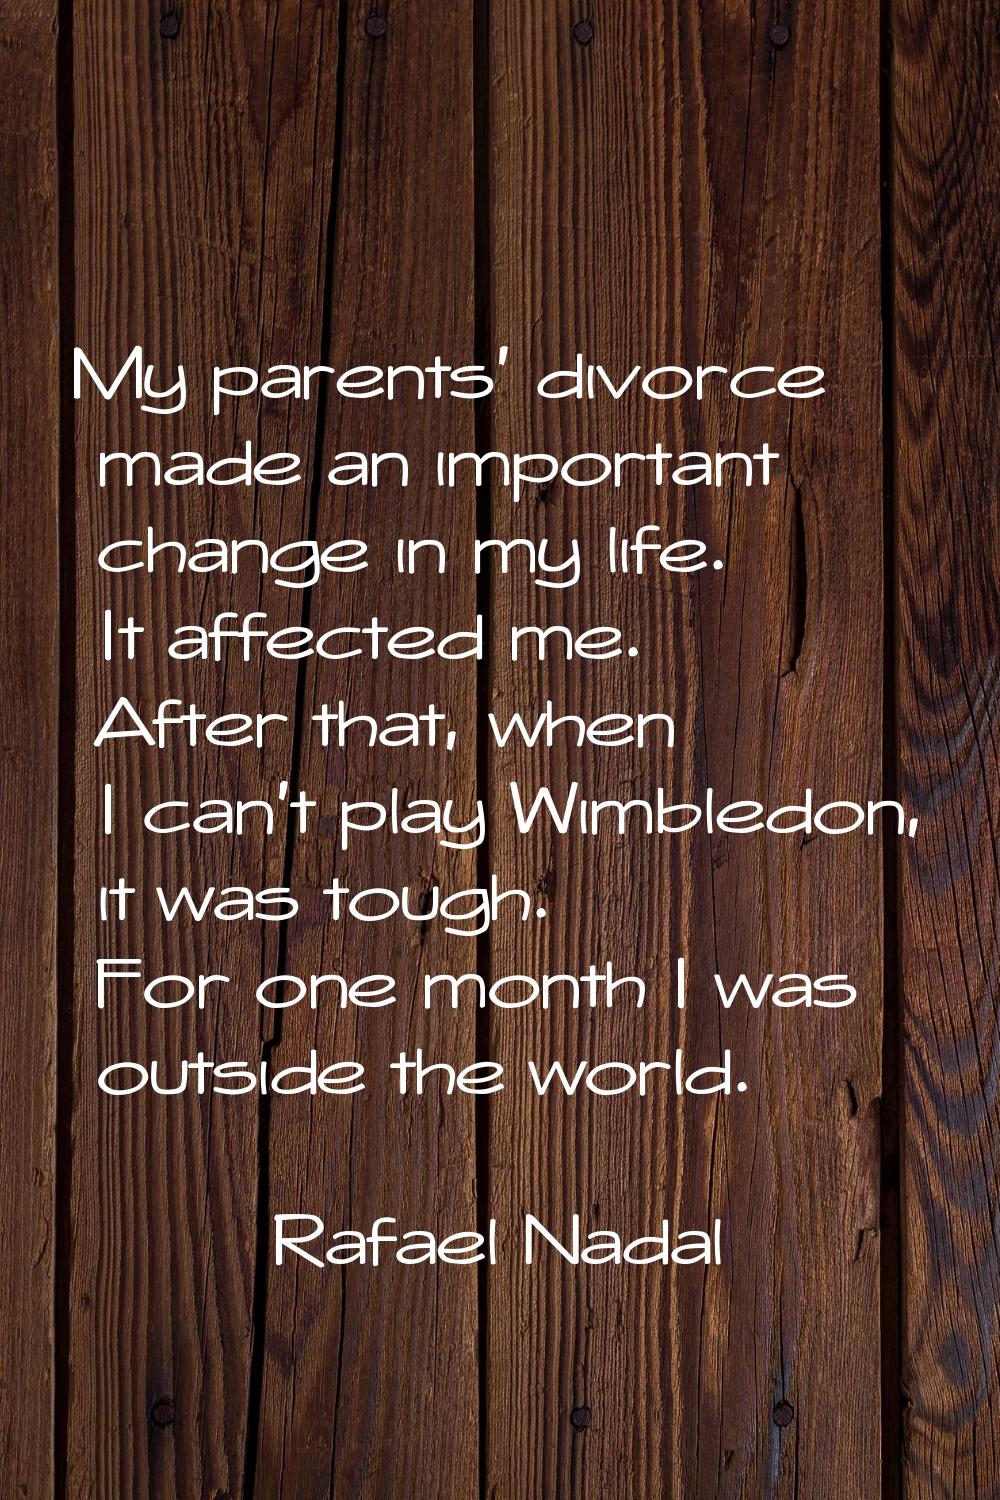 My parents' divorce made an important change in my life. It affected me. After that, when I can't p